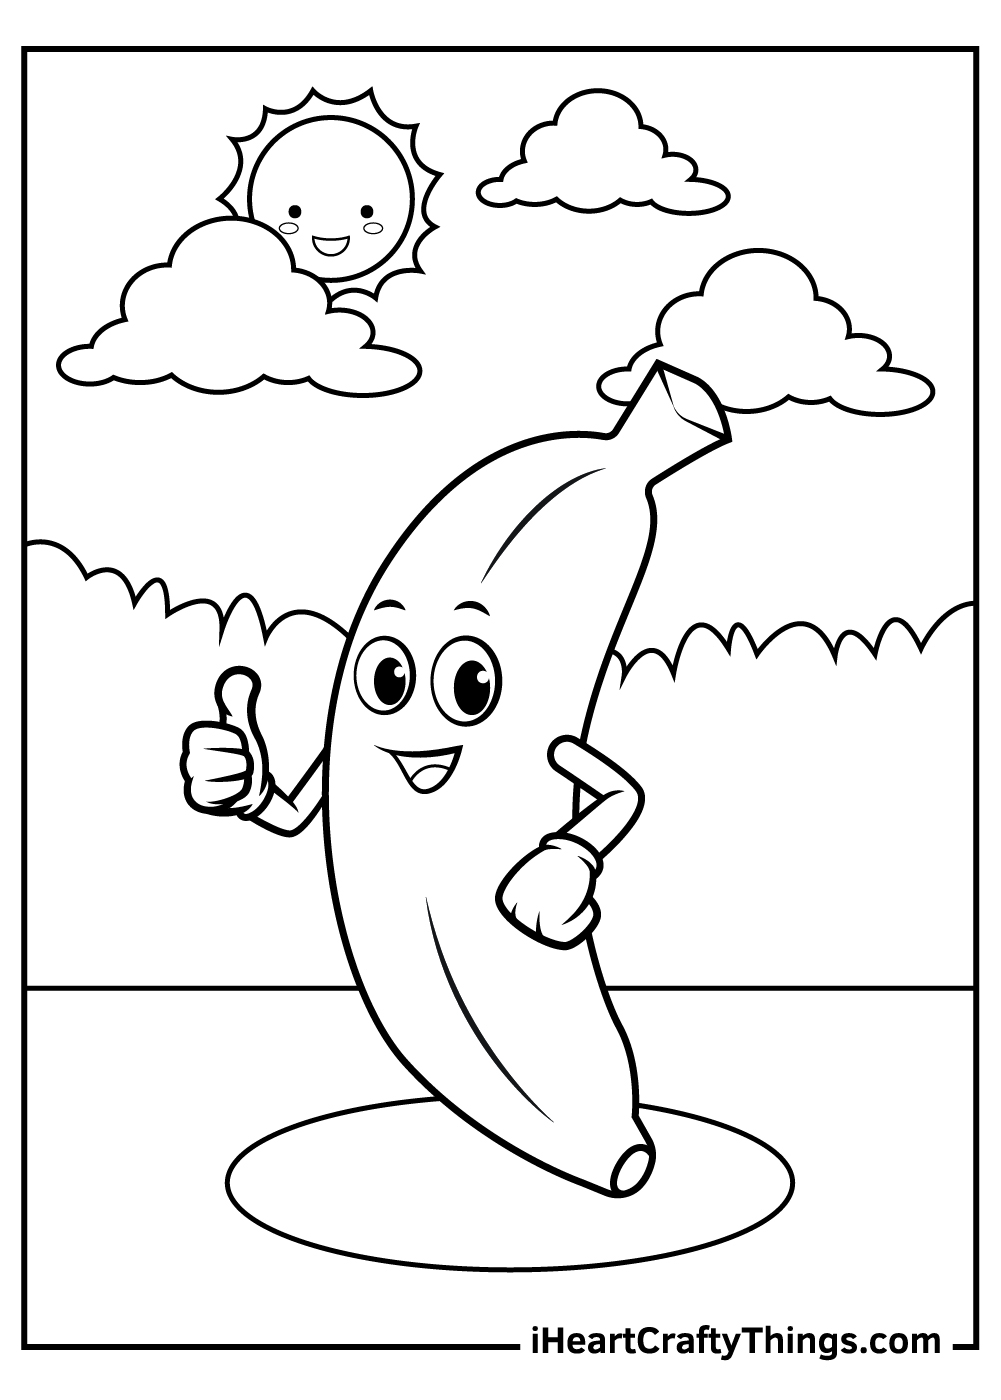 Bananas Coloring Pages Updated 20